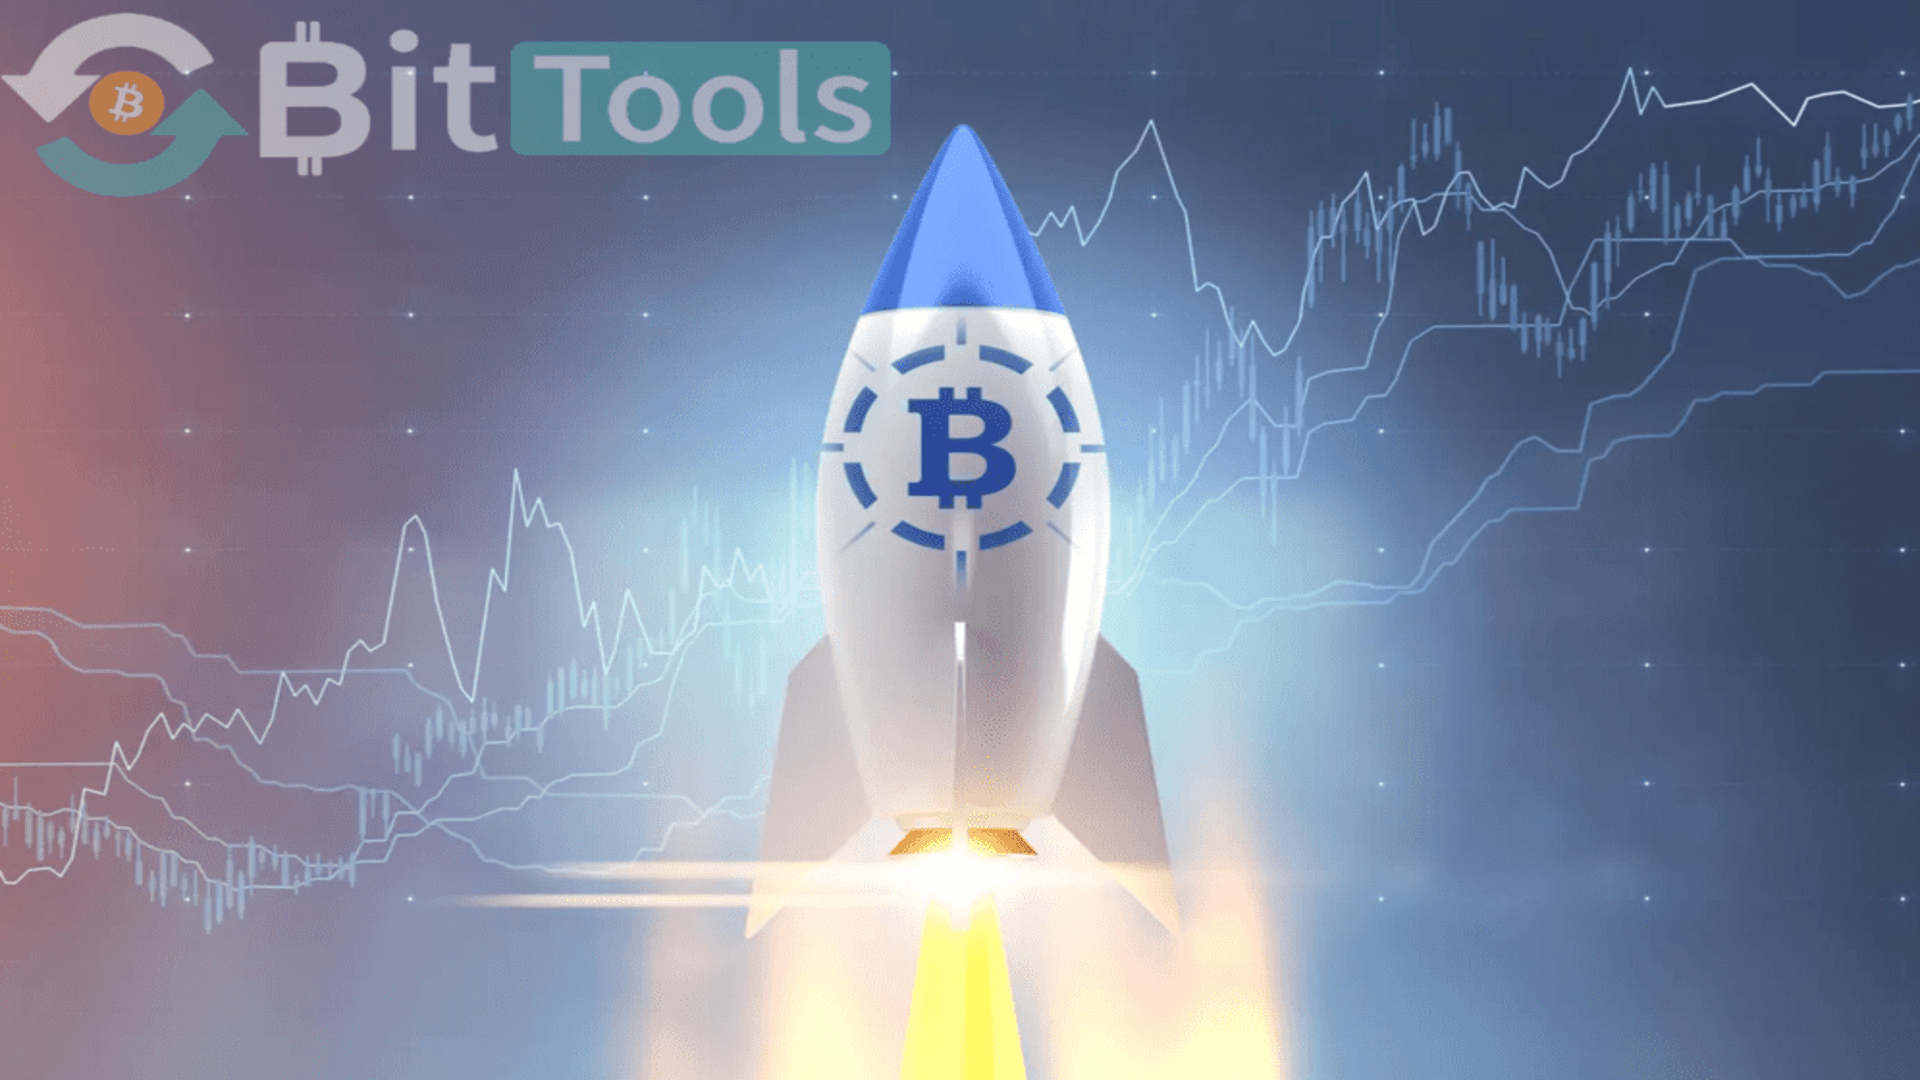 BitTools: A Leading Bitcoin Accelerator for Confirming Pending Transactions